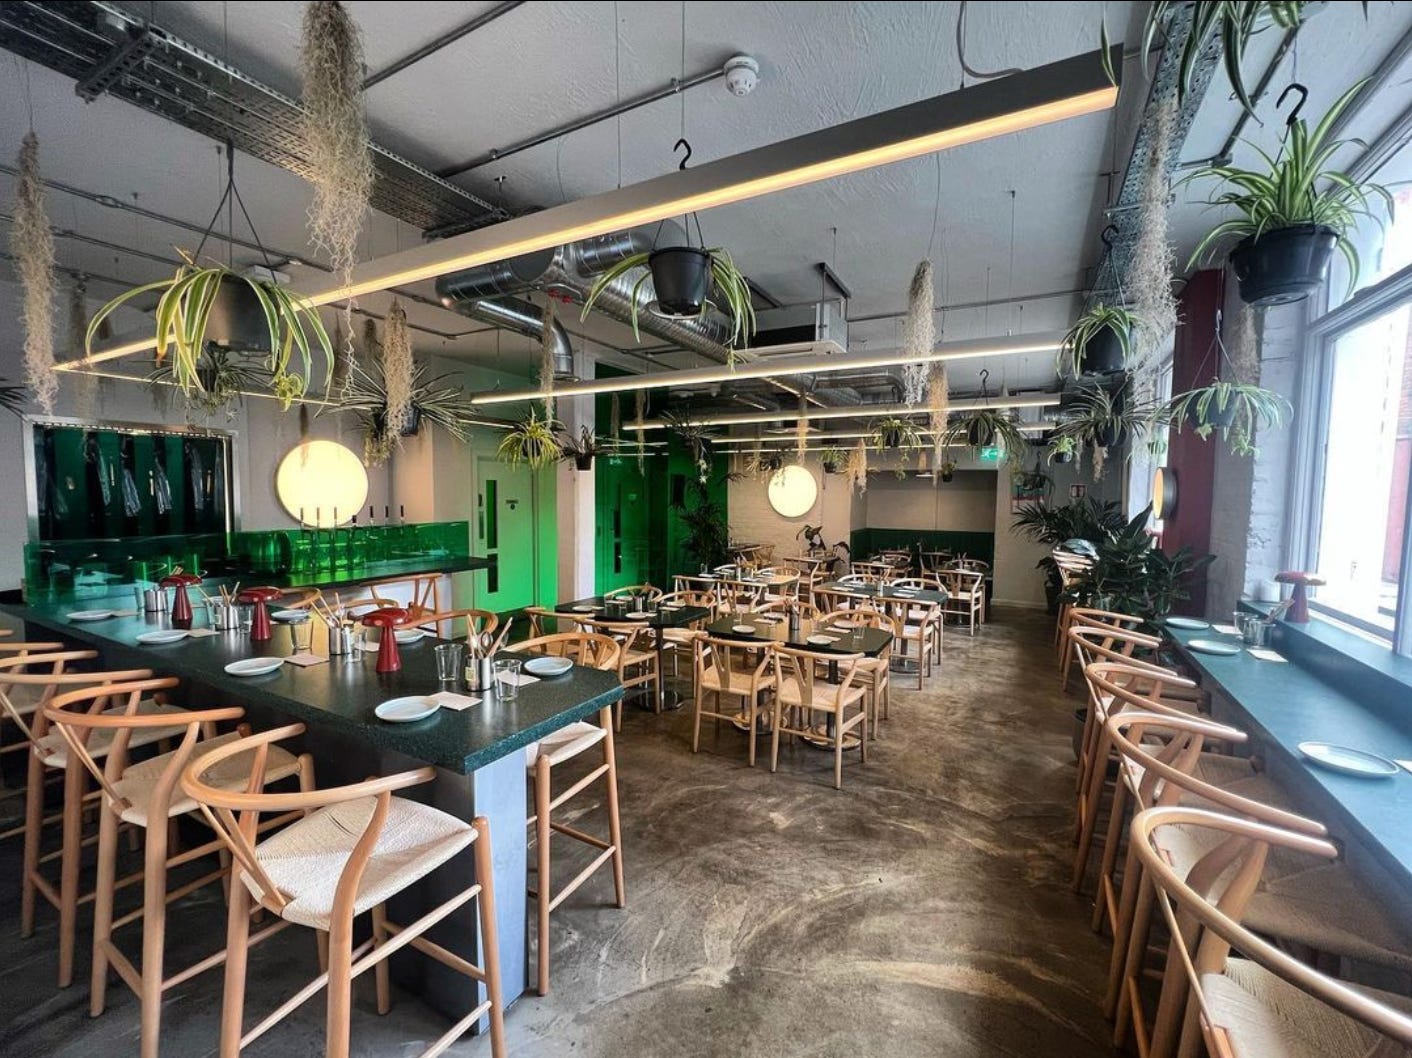 Interior of Lucky Tortoise. Rows of tables with chairs sit under a lush display of hanging flower pots and visible ceiling beams. To the side, stools are tucked under a bar for solo diners. 